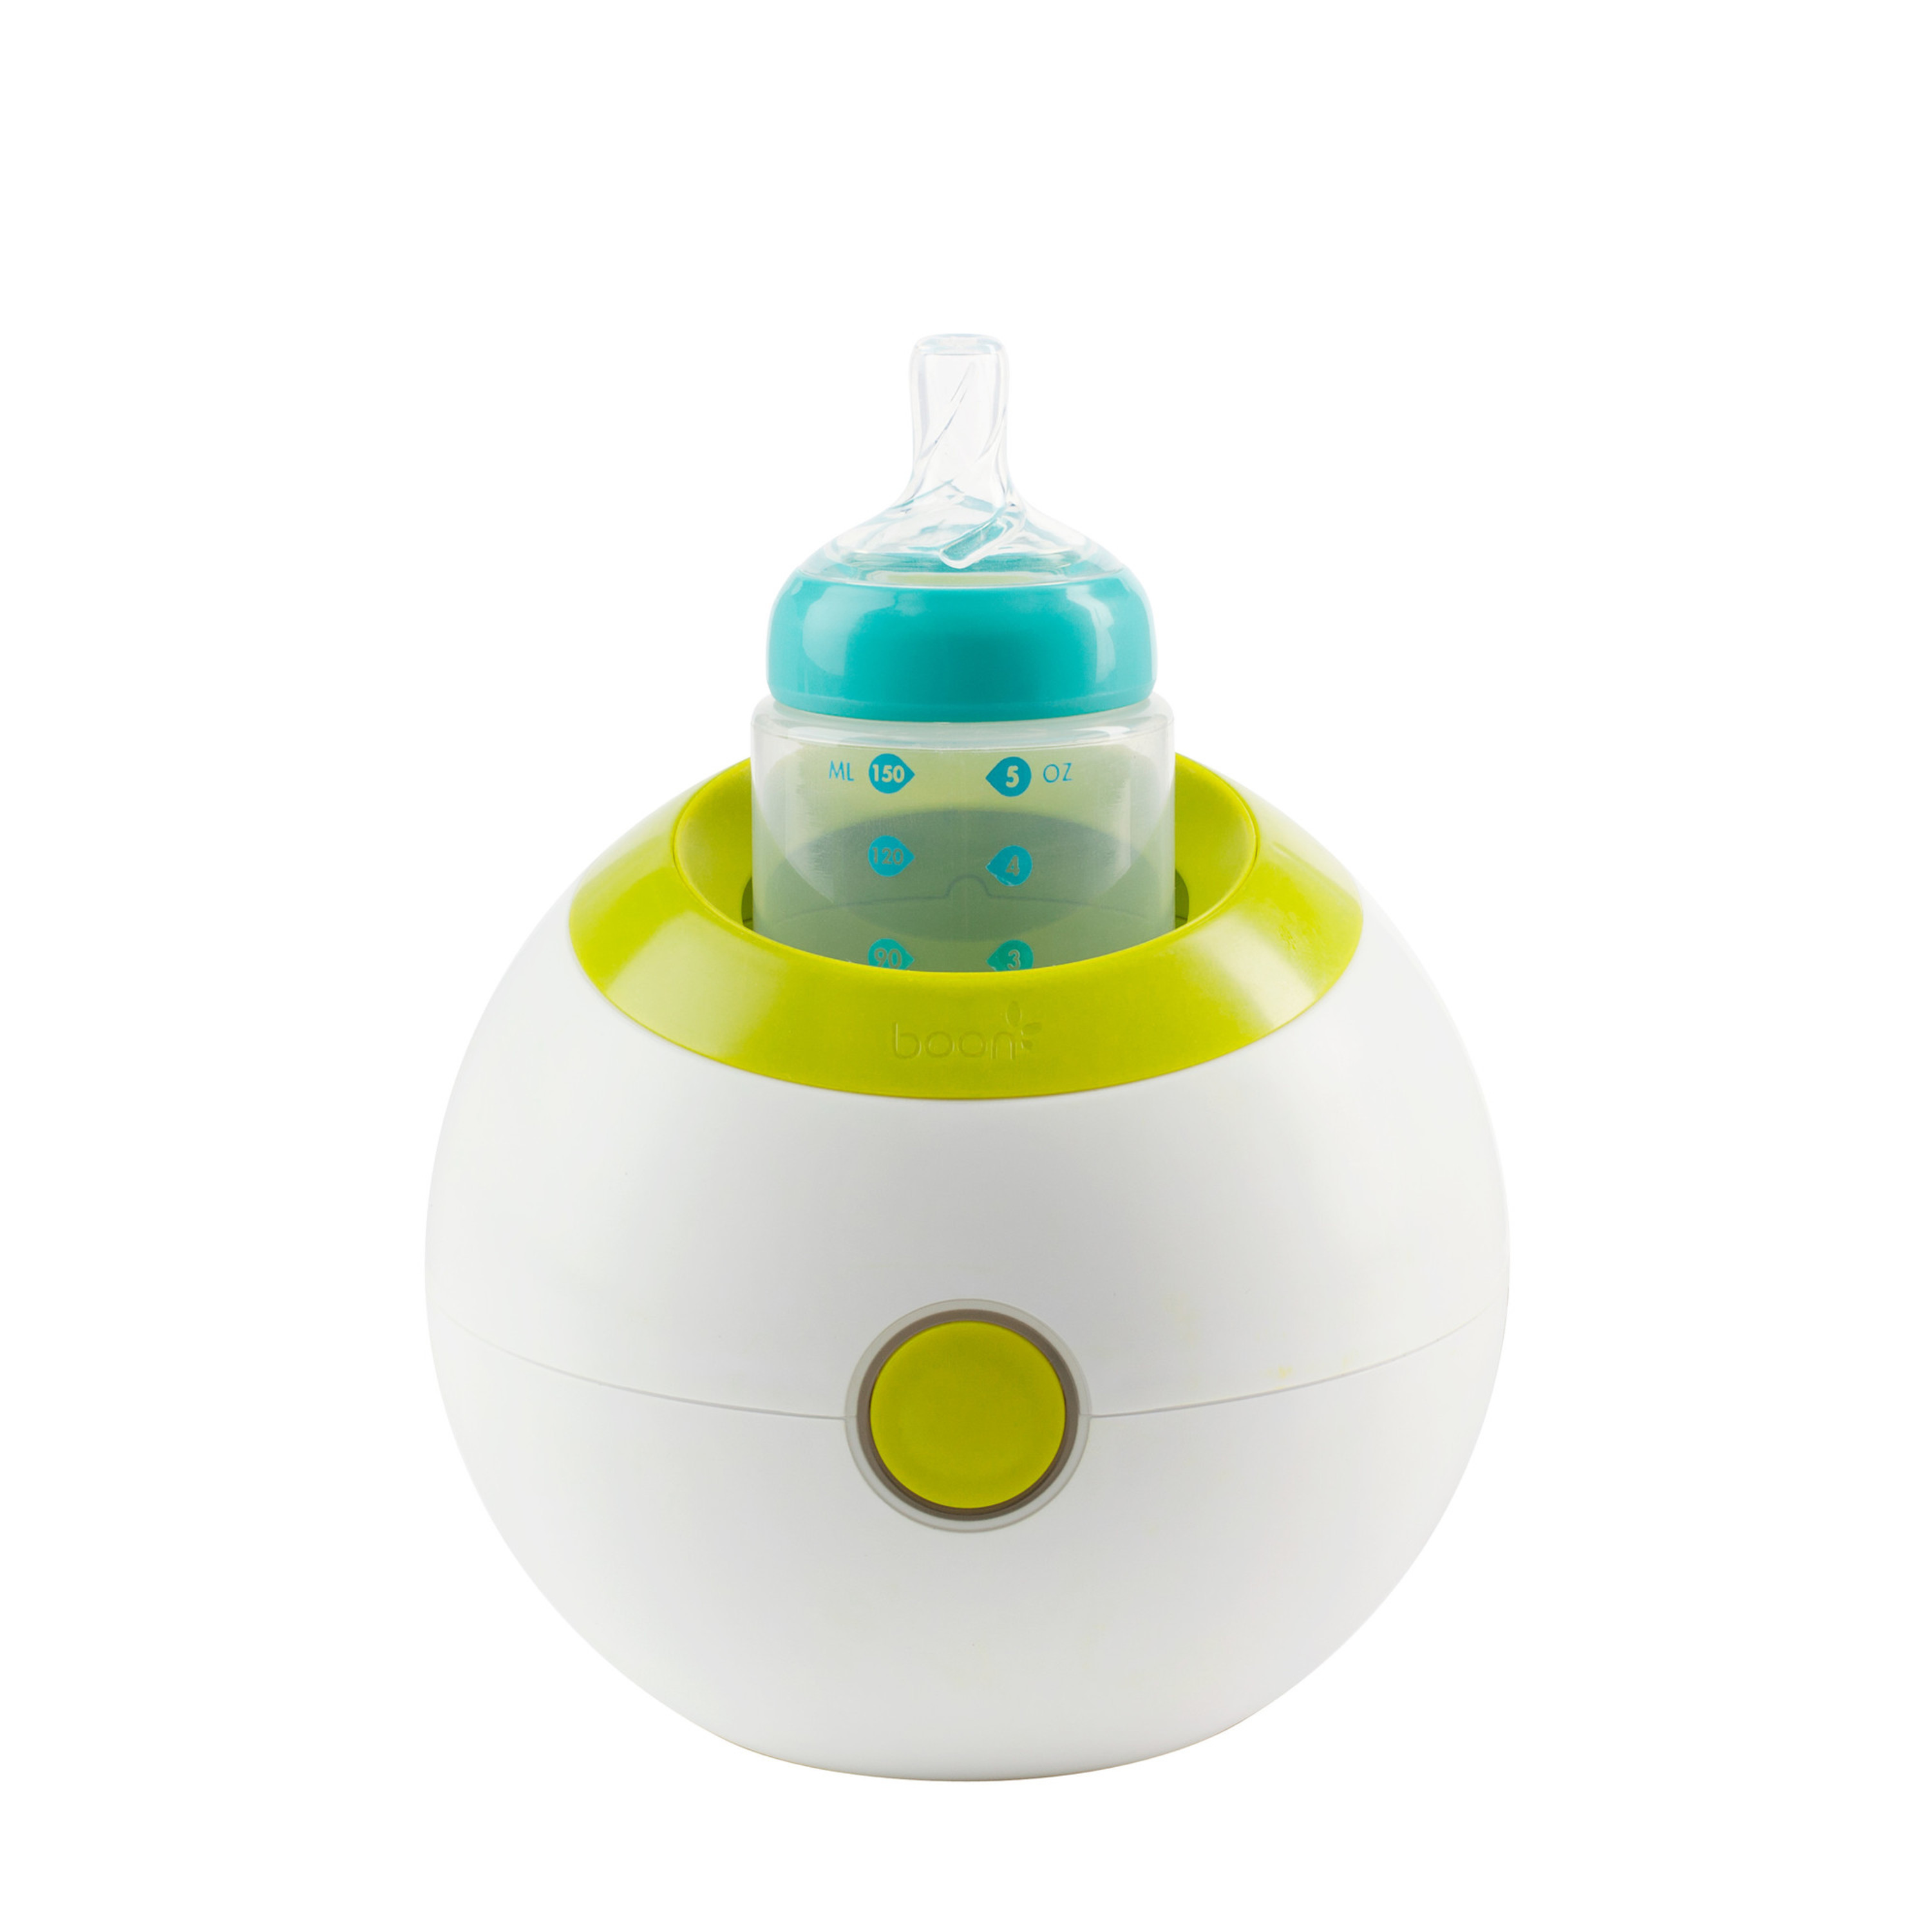 Boon Orb Bottle Warmer Fits Most Baby Bottles, Baby Bottle & Baby Food Warmer, Green + White - image 5 of 5